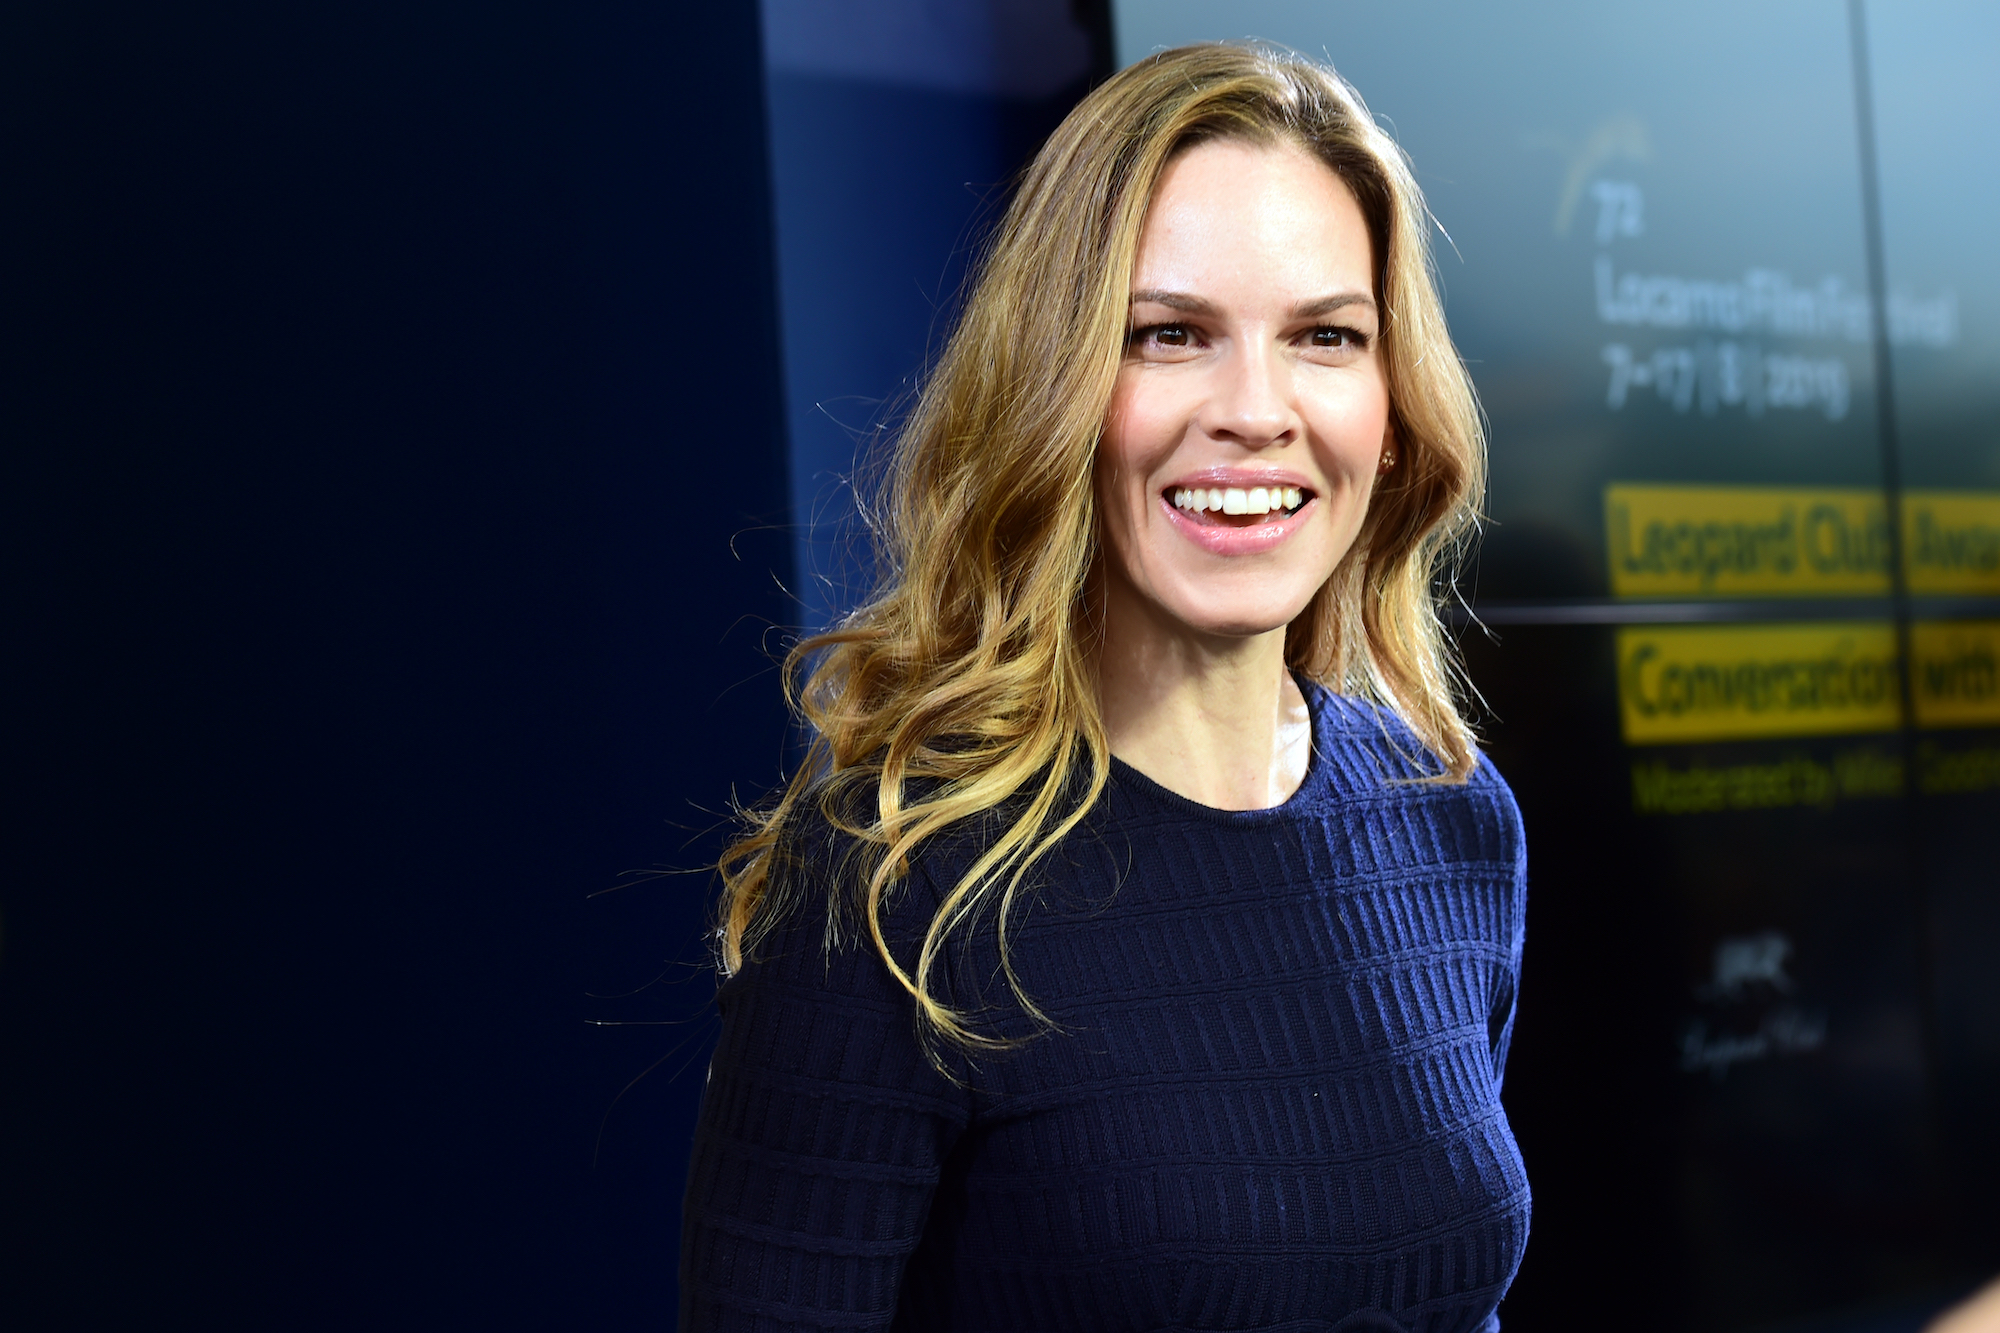 Hilary Swank smiling in front of a blue background